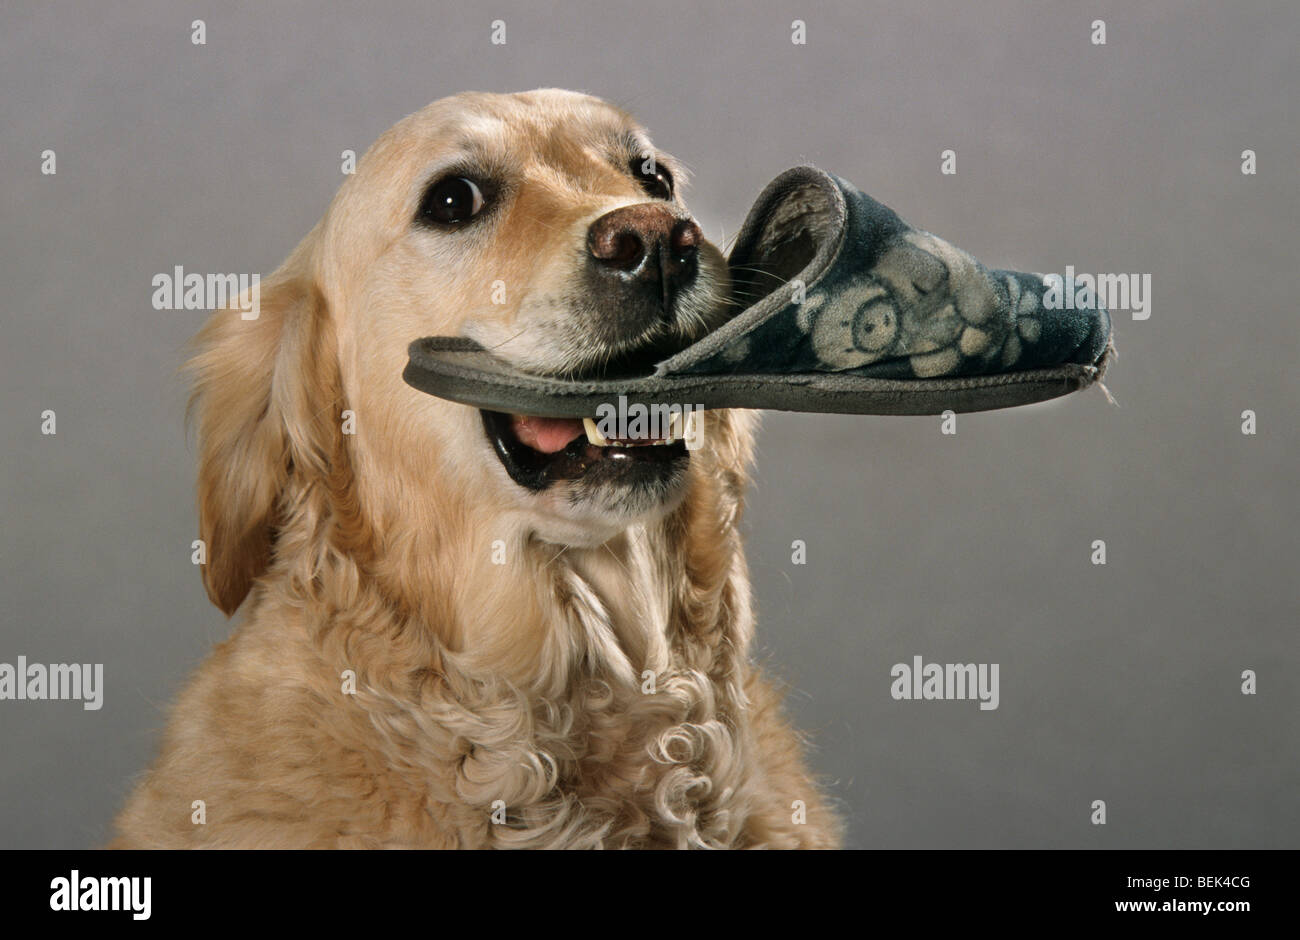 Labrador assistance dog as help for disabled people bringing slippers in mouth Stock Photo